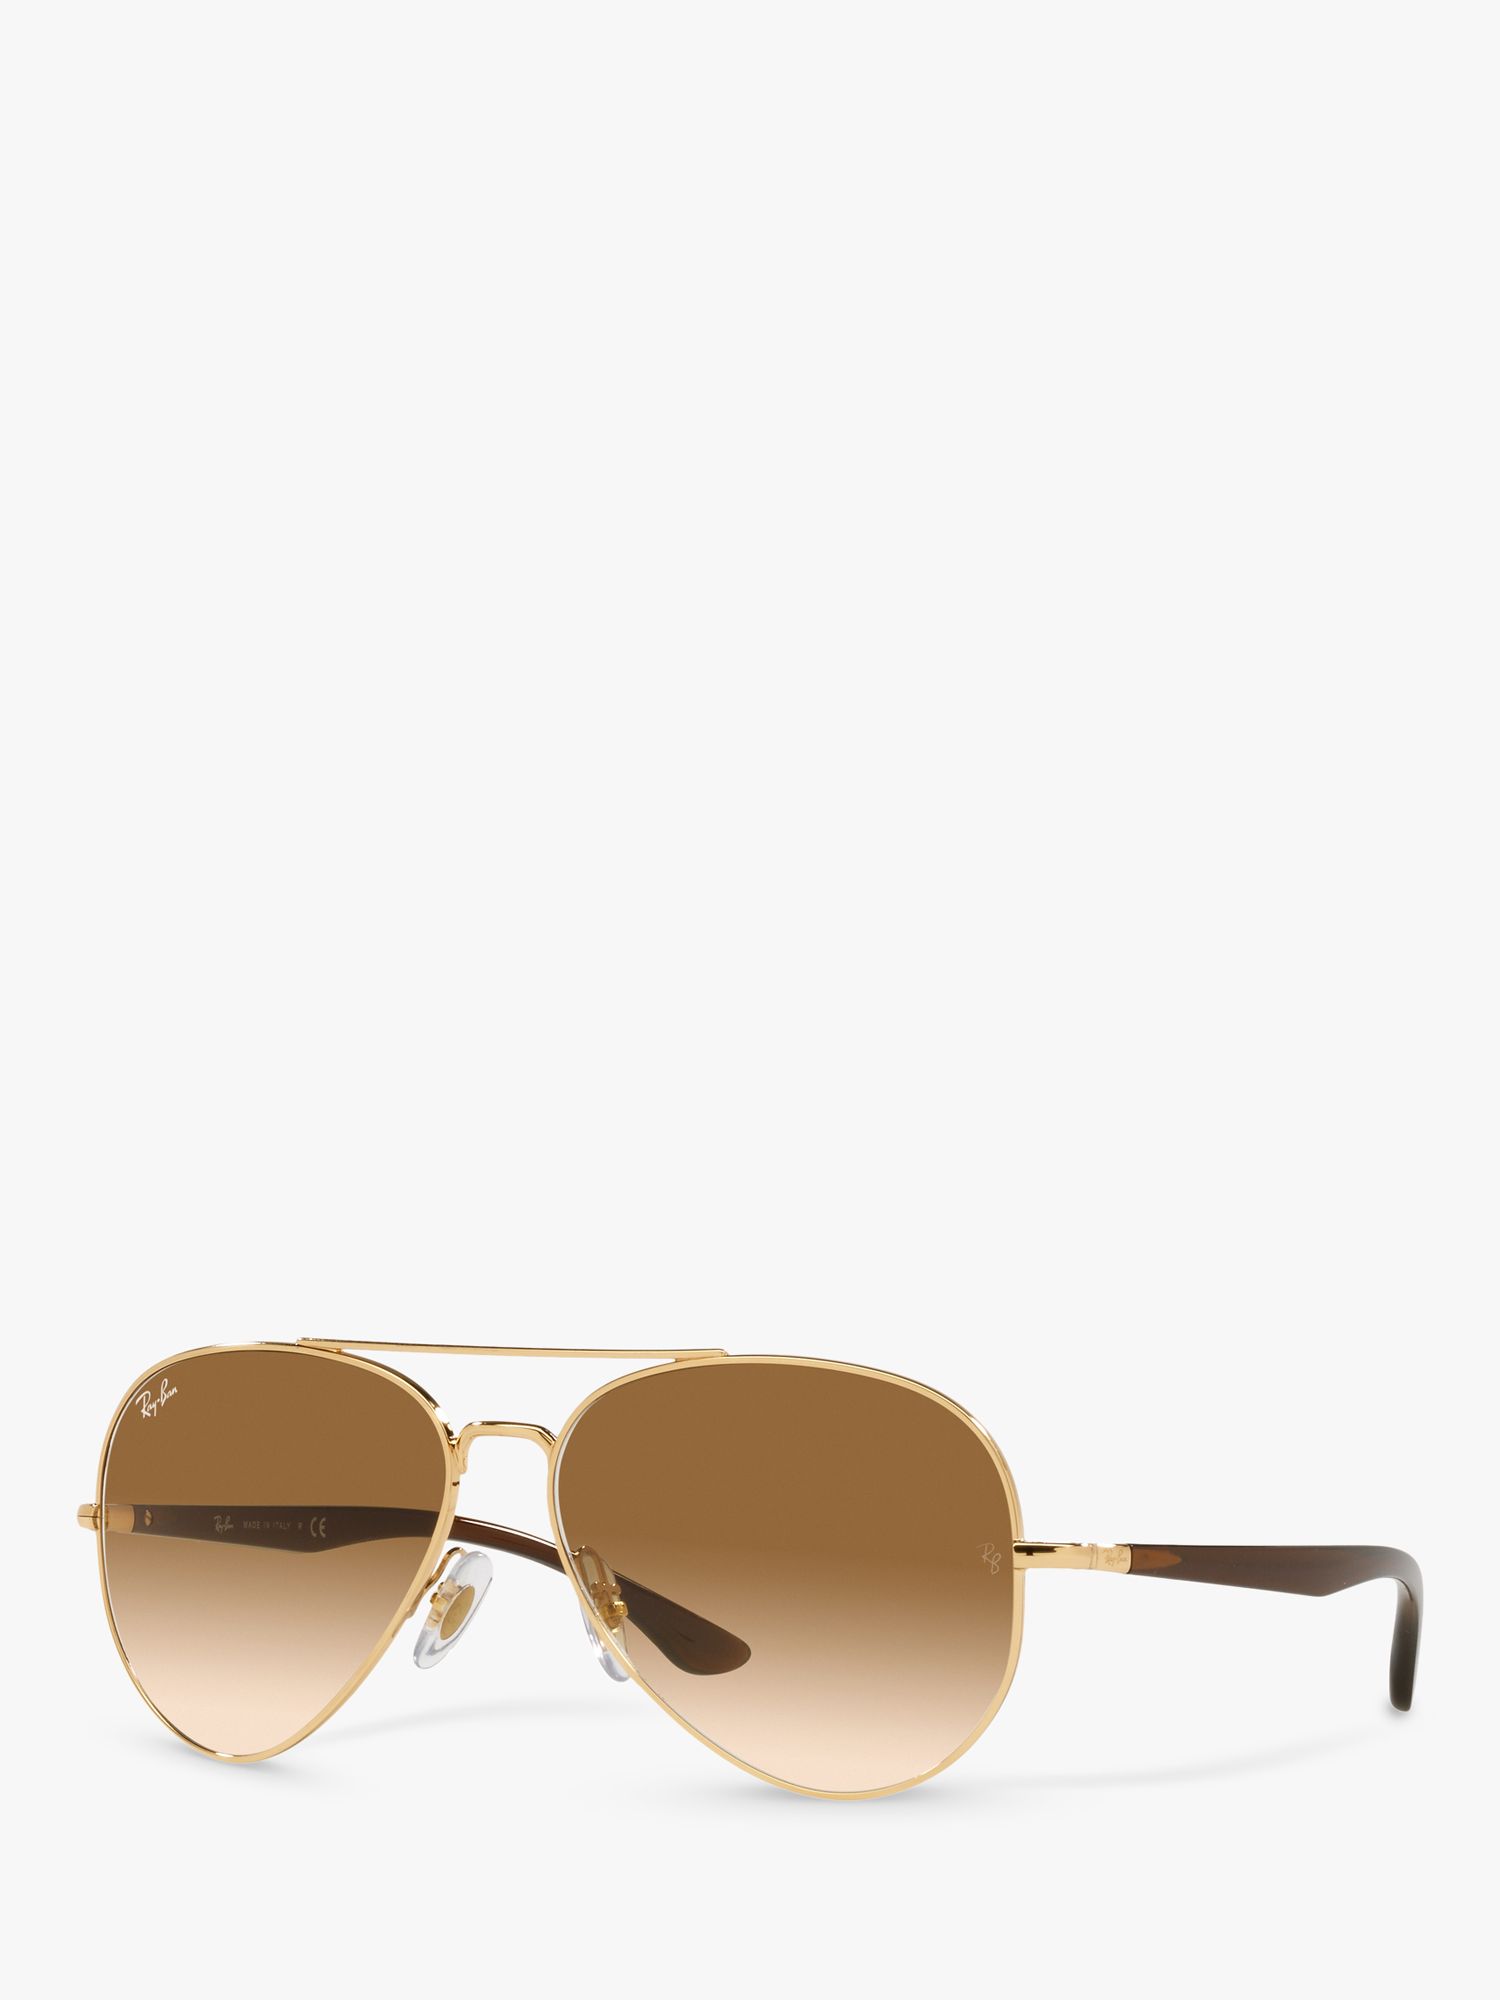 Ray-Ban RB3675 Unisex Aviator Sunglasses, Gold/Brown Gradient at John Lewis  & Partners